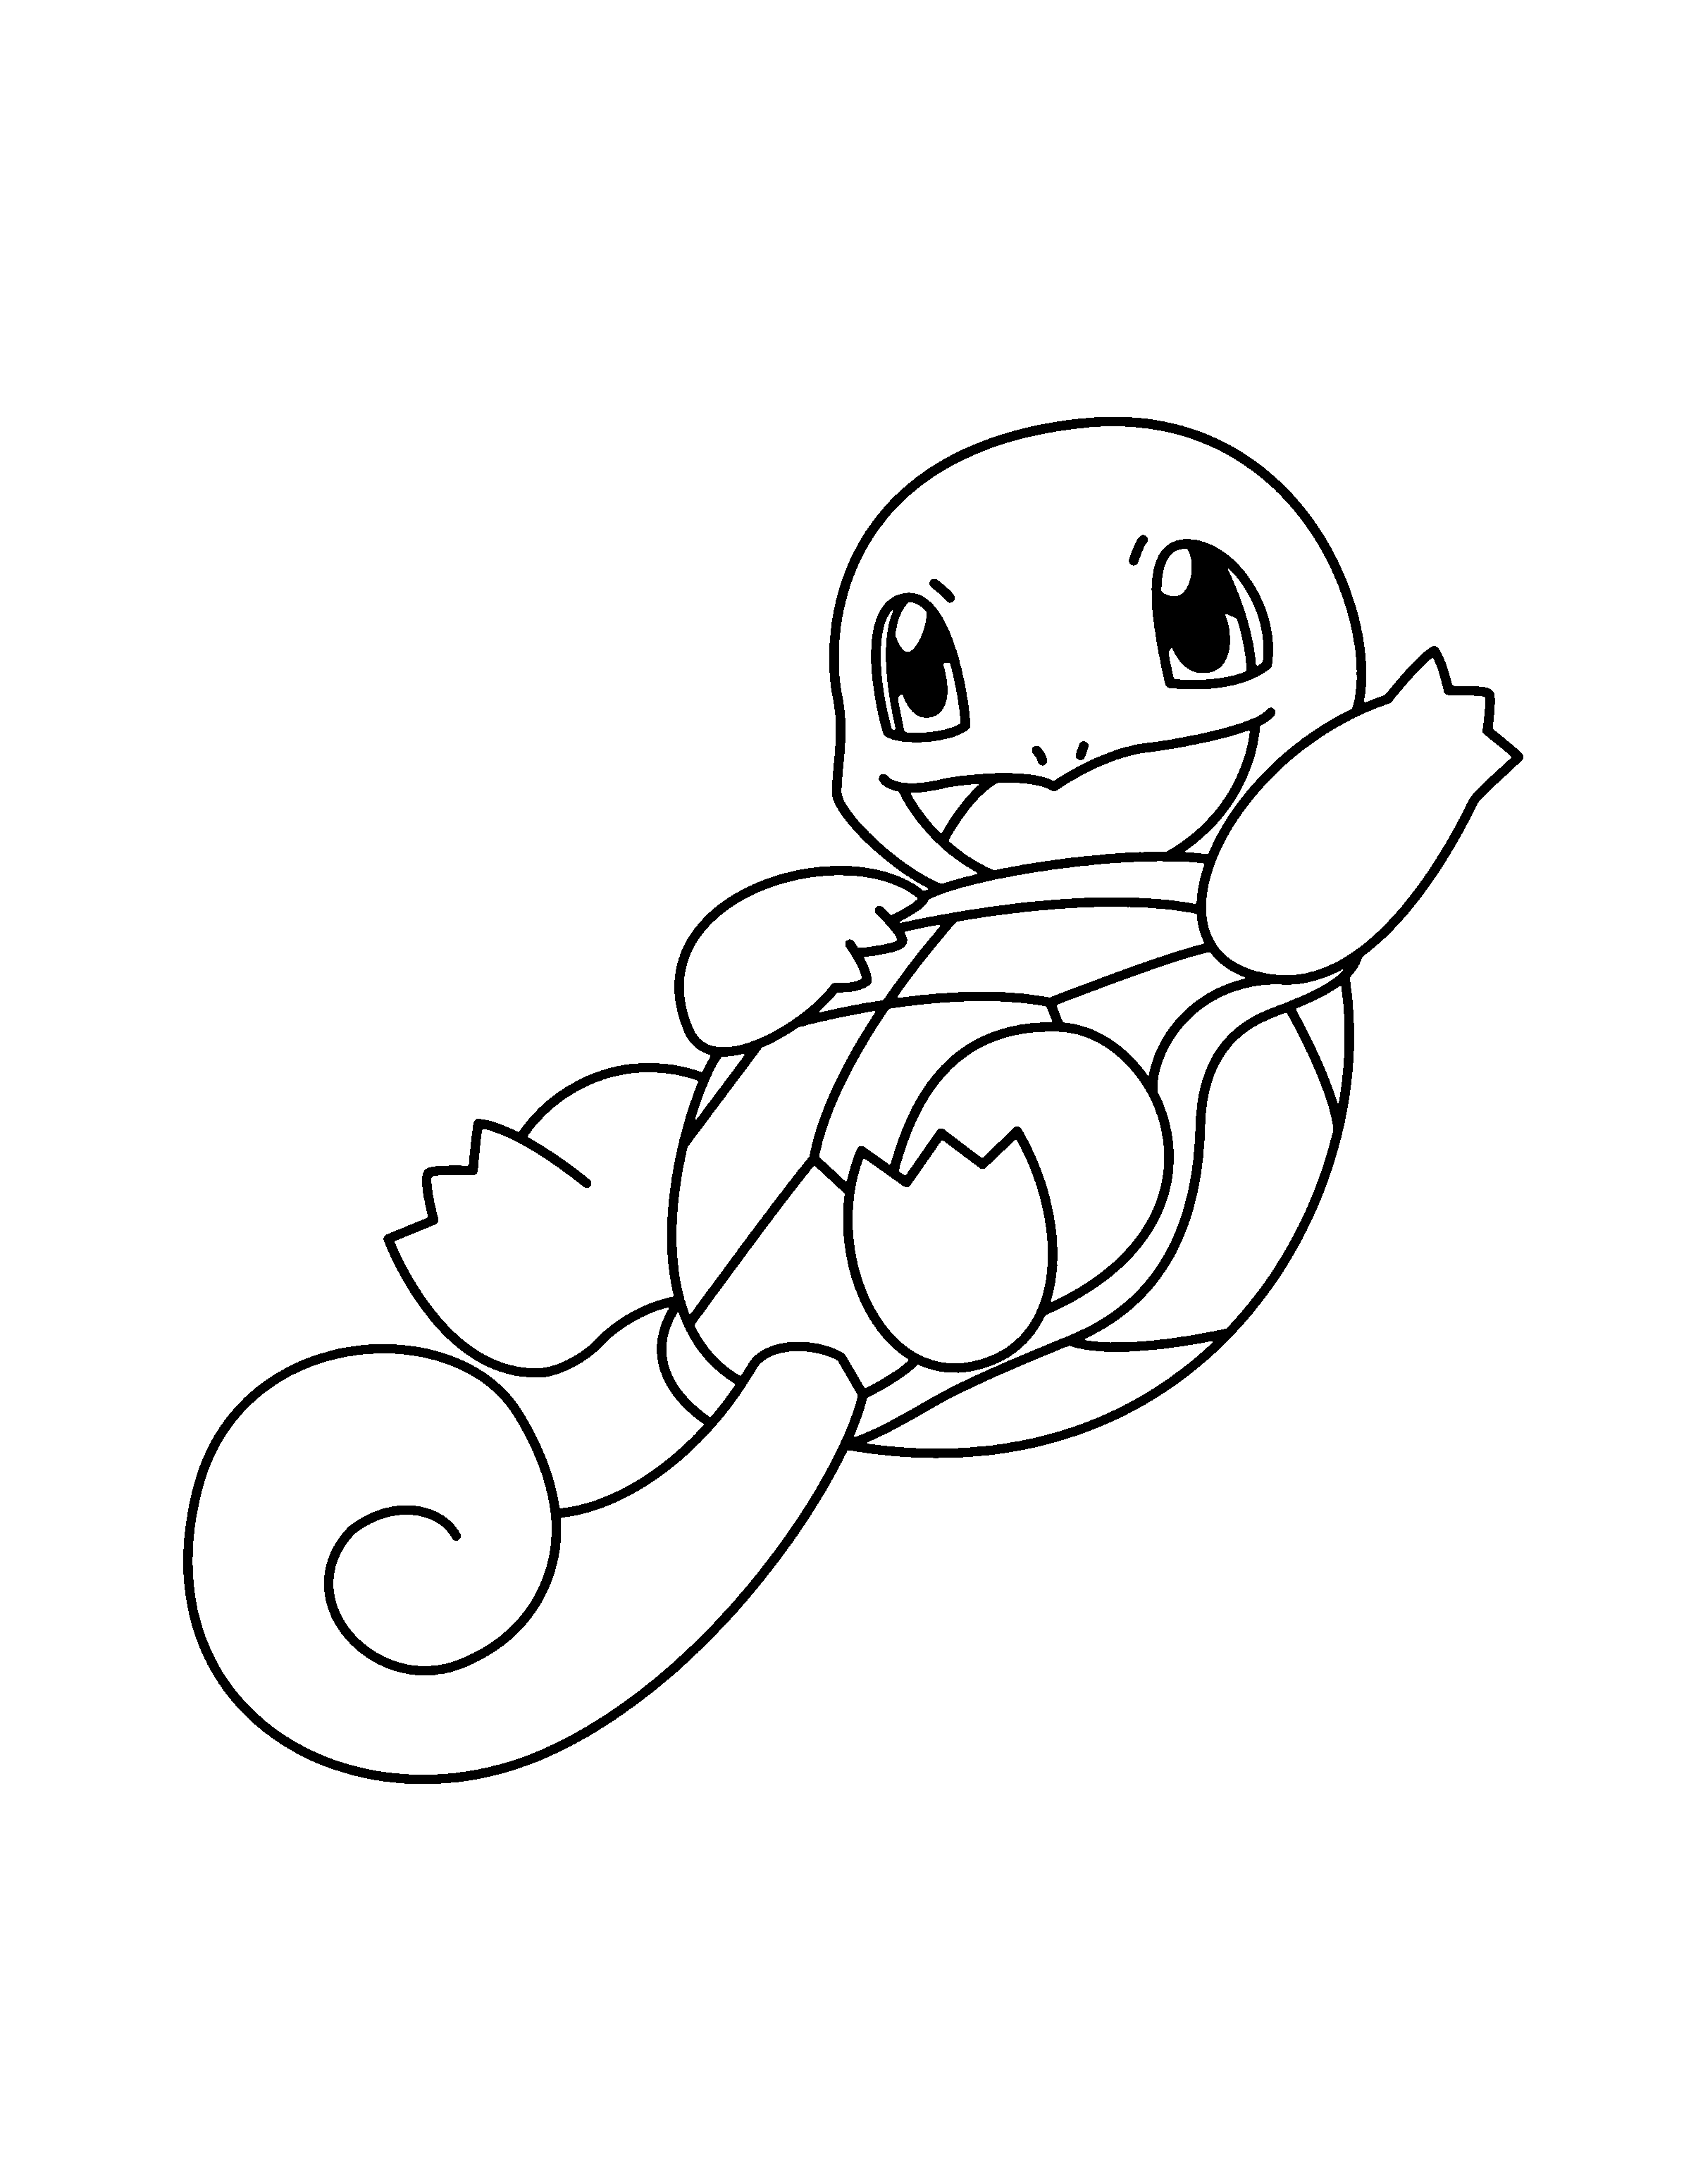 squirtle coloring page squirtle coloring pages to download and print for free coloring page squirtle 1 1